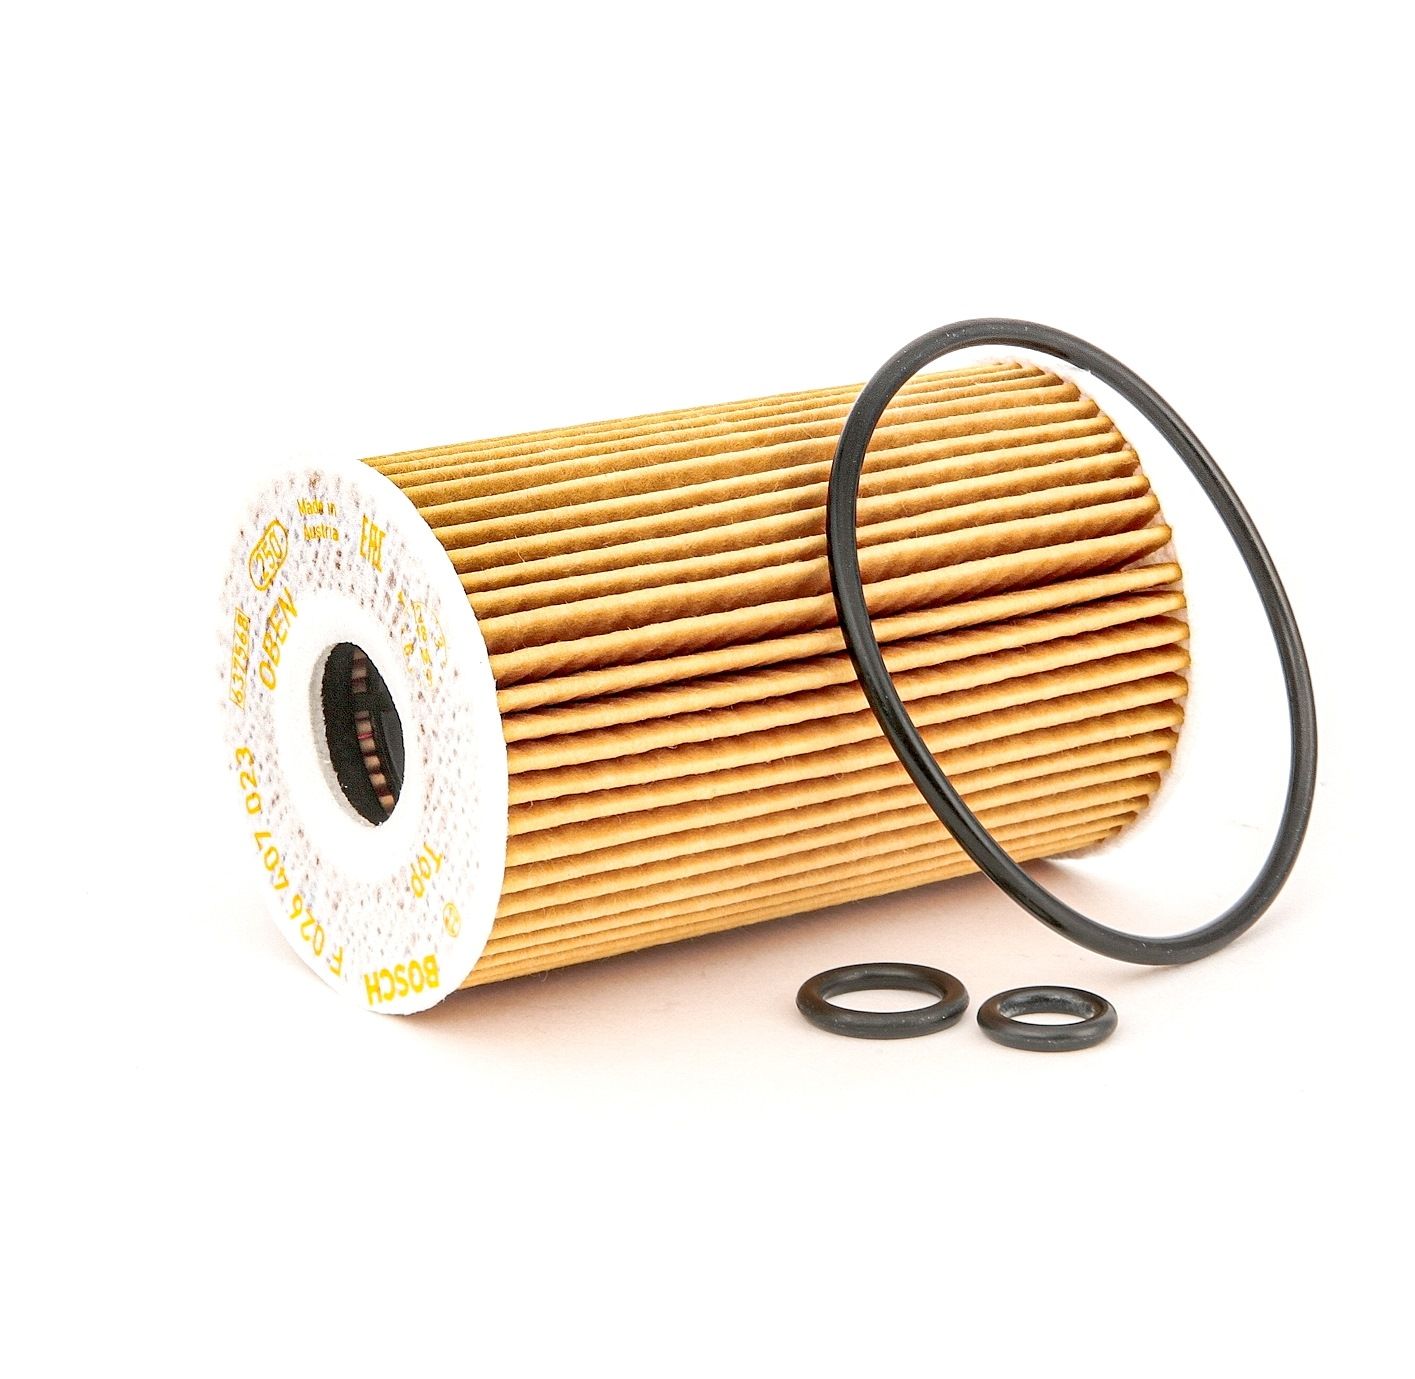 Audi Oil filter BOSCH P 7023 at a good price